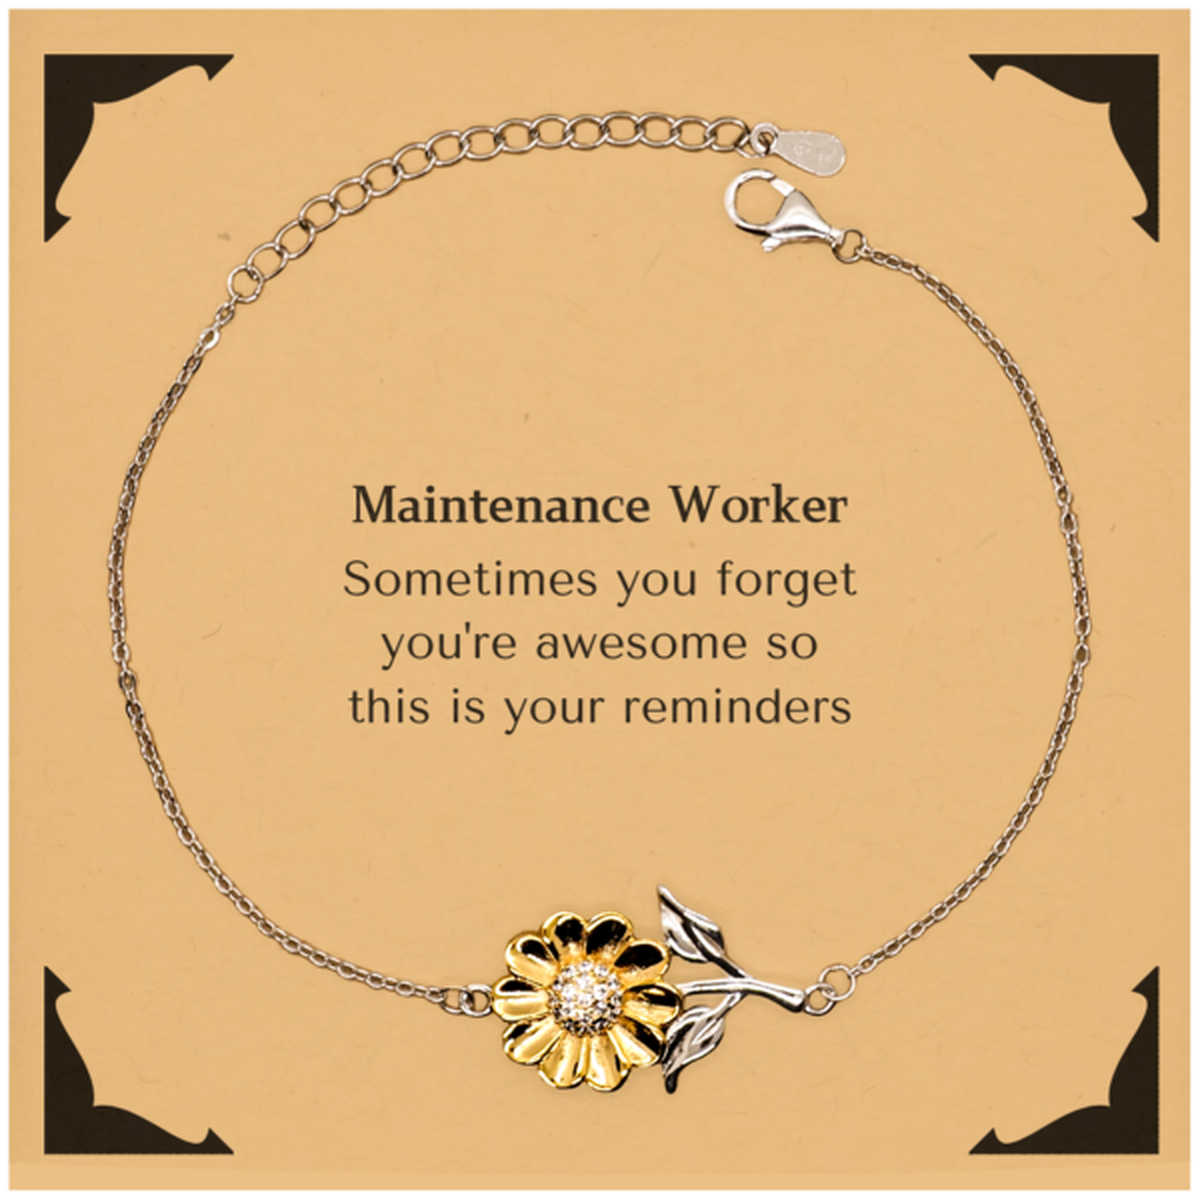 Sentimental Maintenance Worker Sunflower Bracelet, Maintenance Worker Sometimes you forget you're awesome so this is your reminders, Graduation Christmas Birthday Gifts for Maintenance Worker, Men, Women, Coworkers